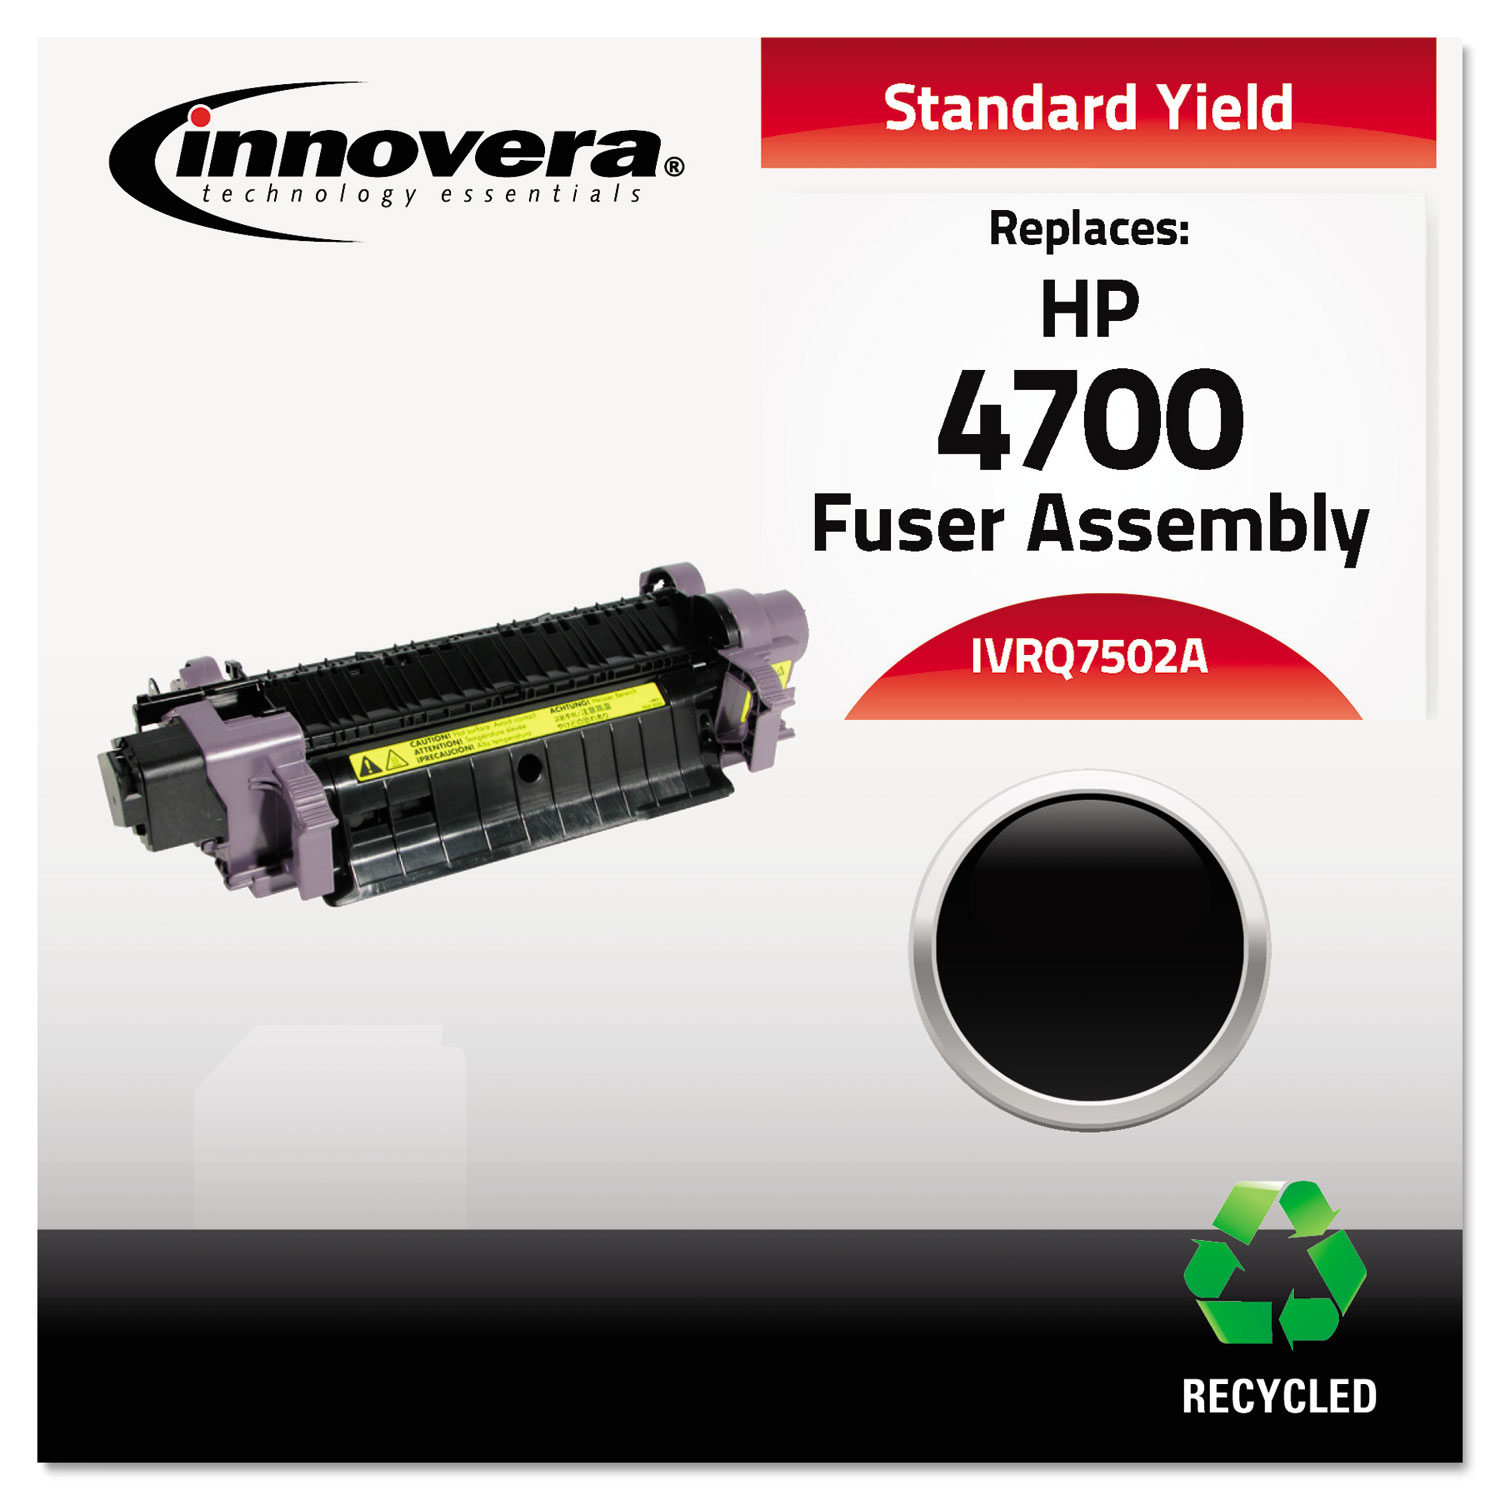  Innovera IVRQ7502A Remanufactured Q7502A (4700) Fuser, 100000 Page-Yield, (IVRQ7502A) 